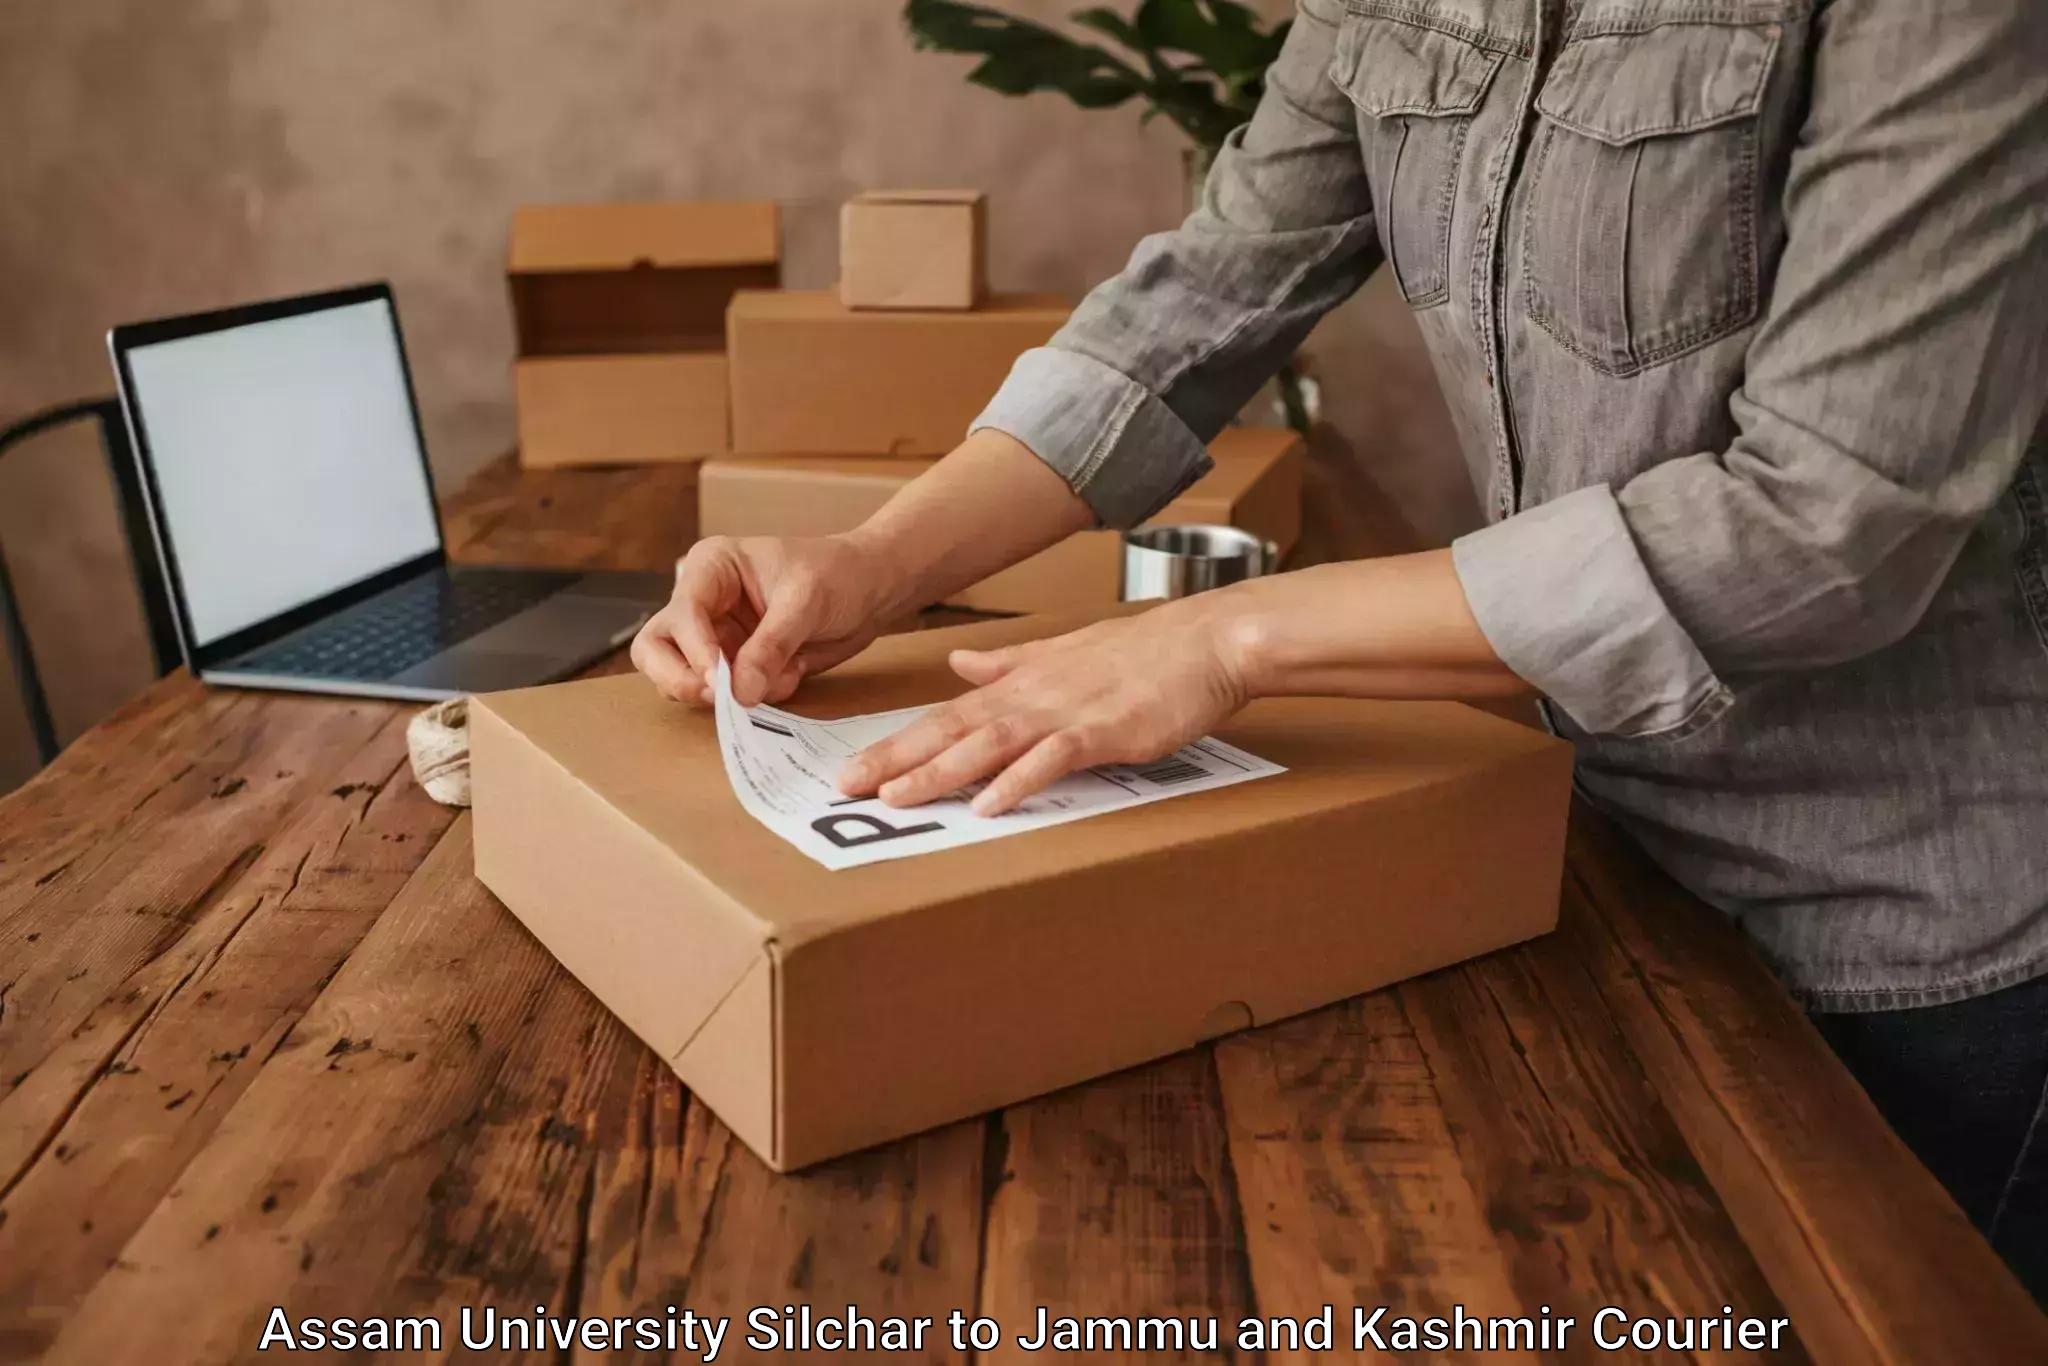 Rapid shipping services in Assam University Silchar to University of Jammu